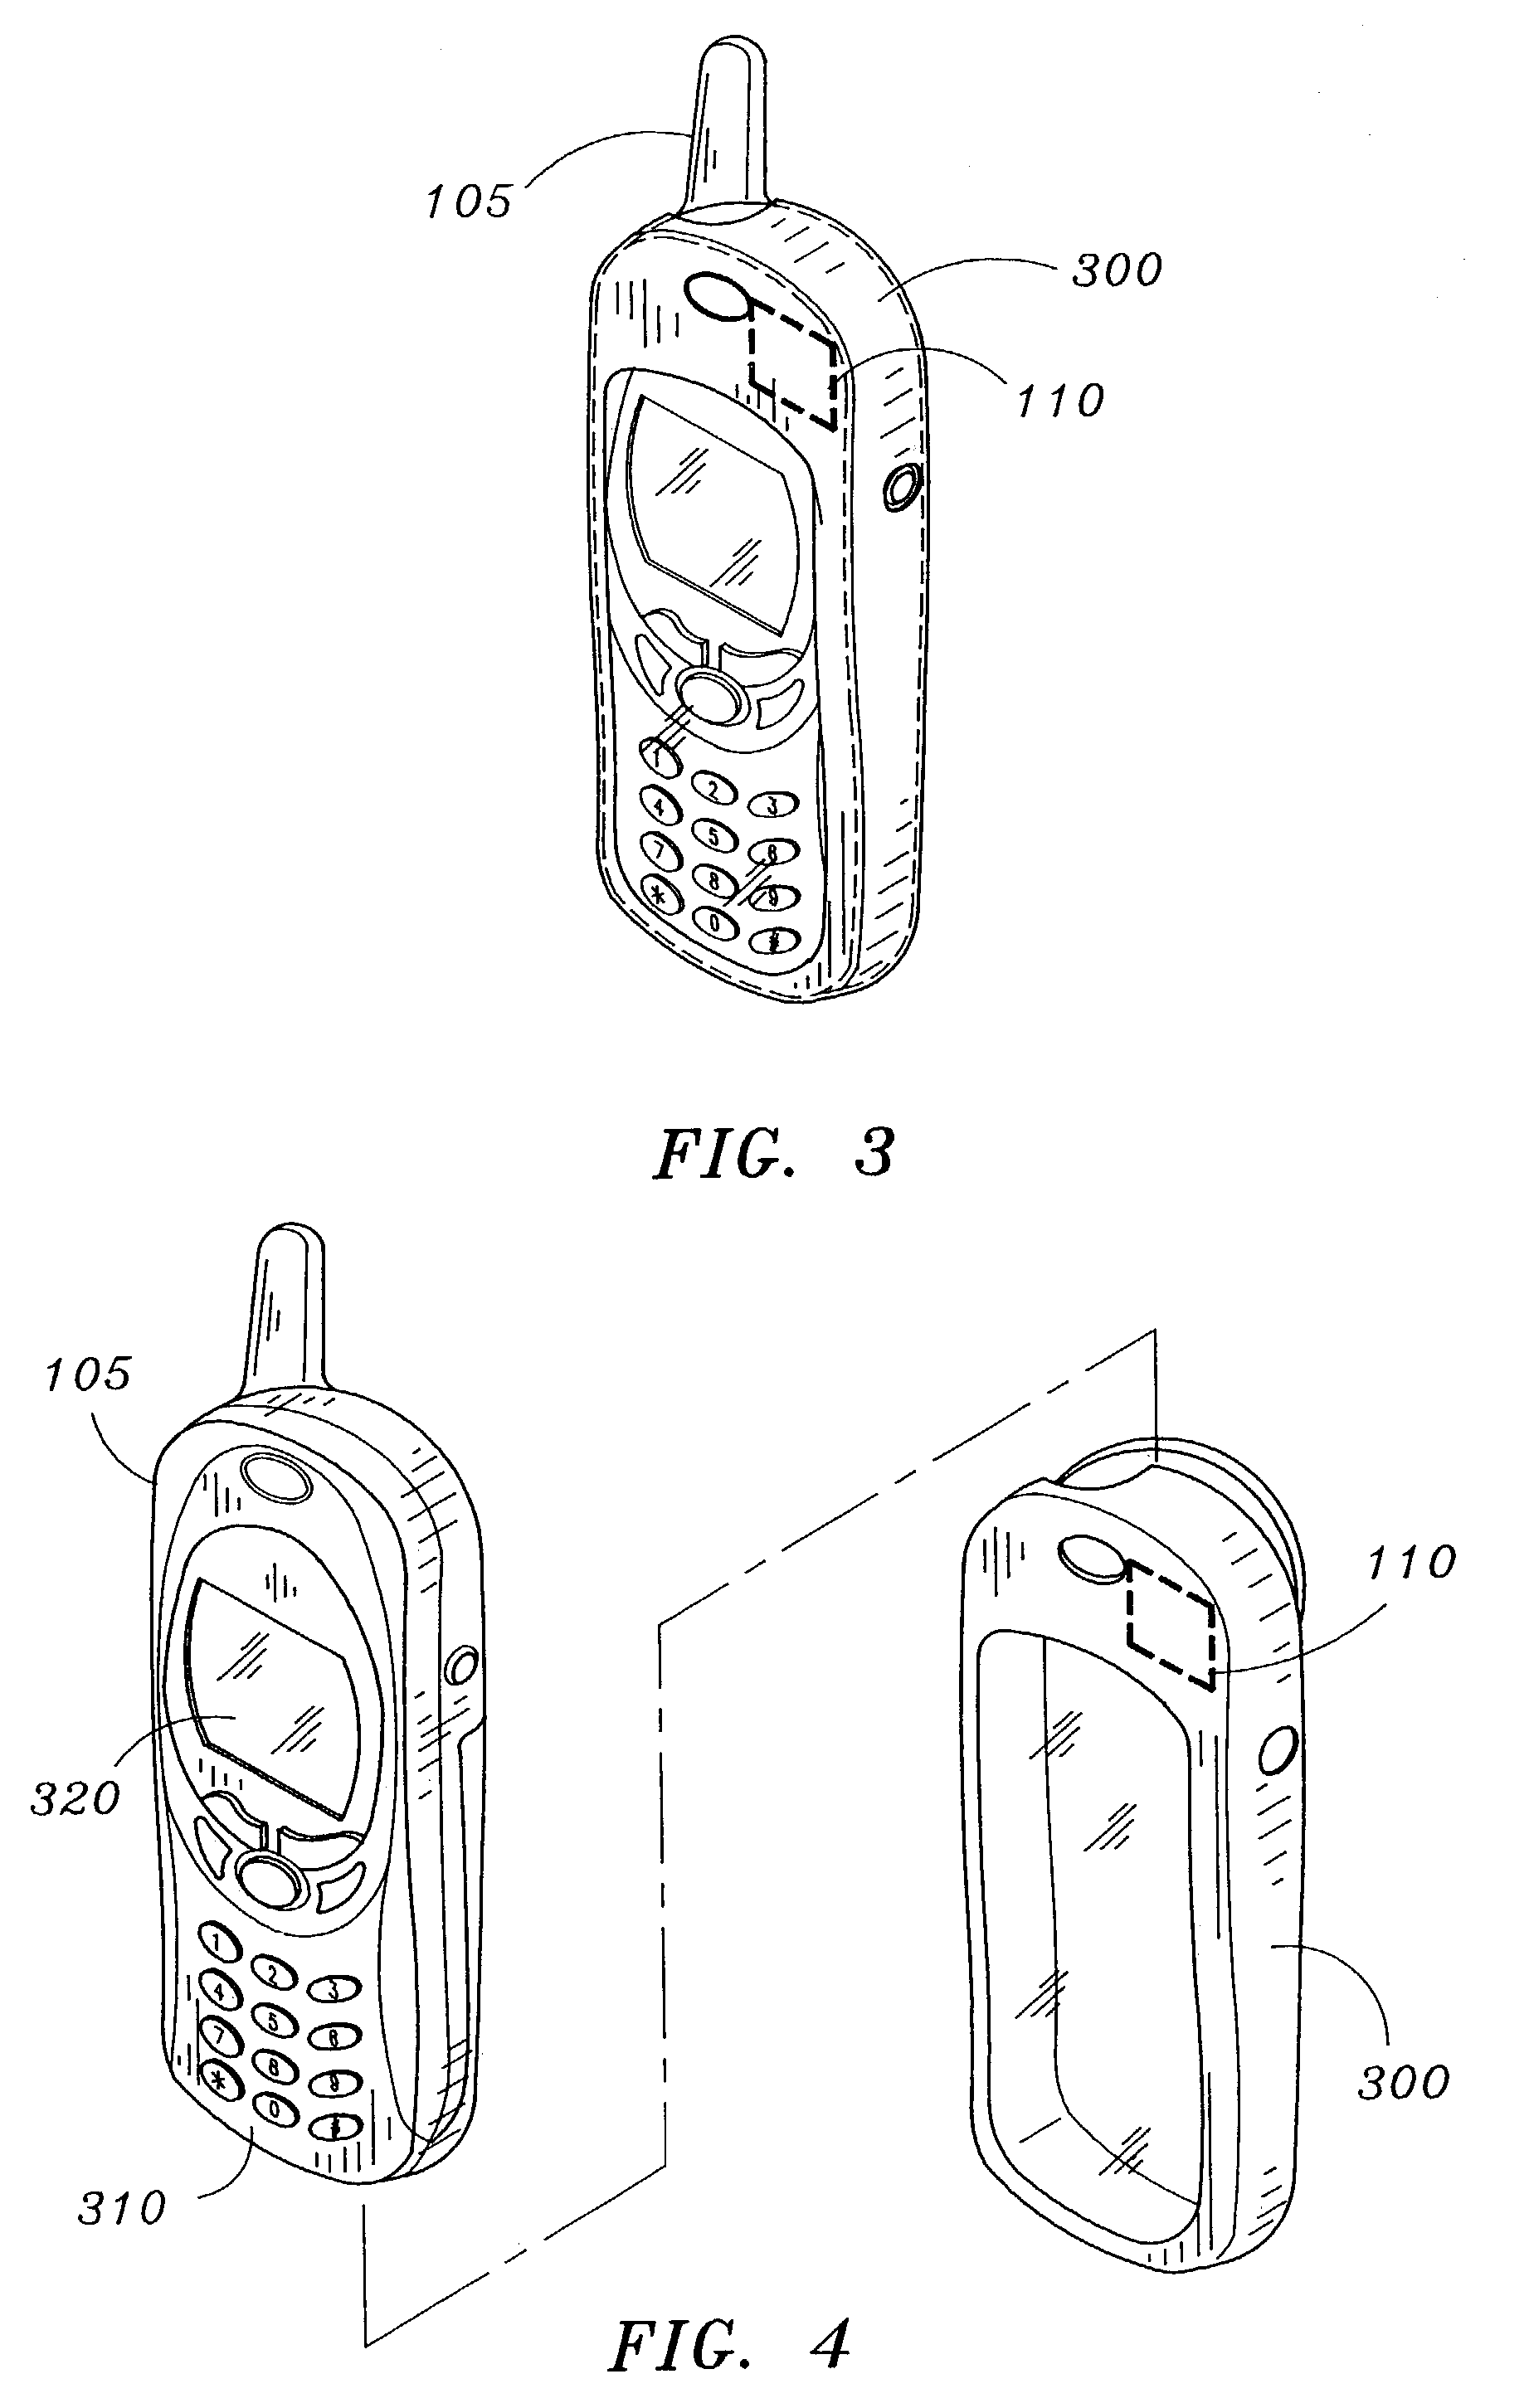 SAR optimized receptacle for mobile devices